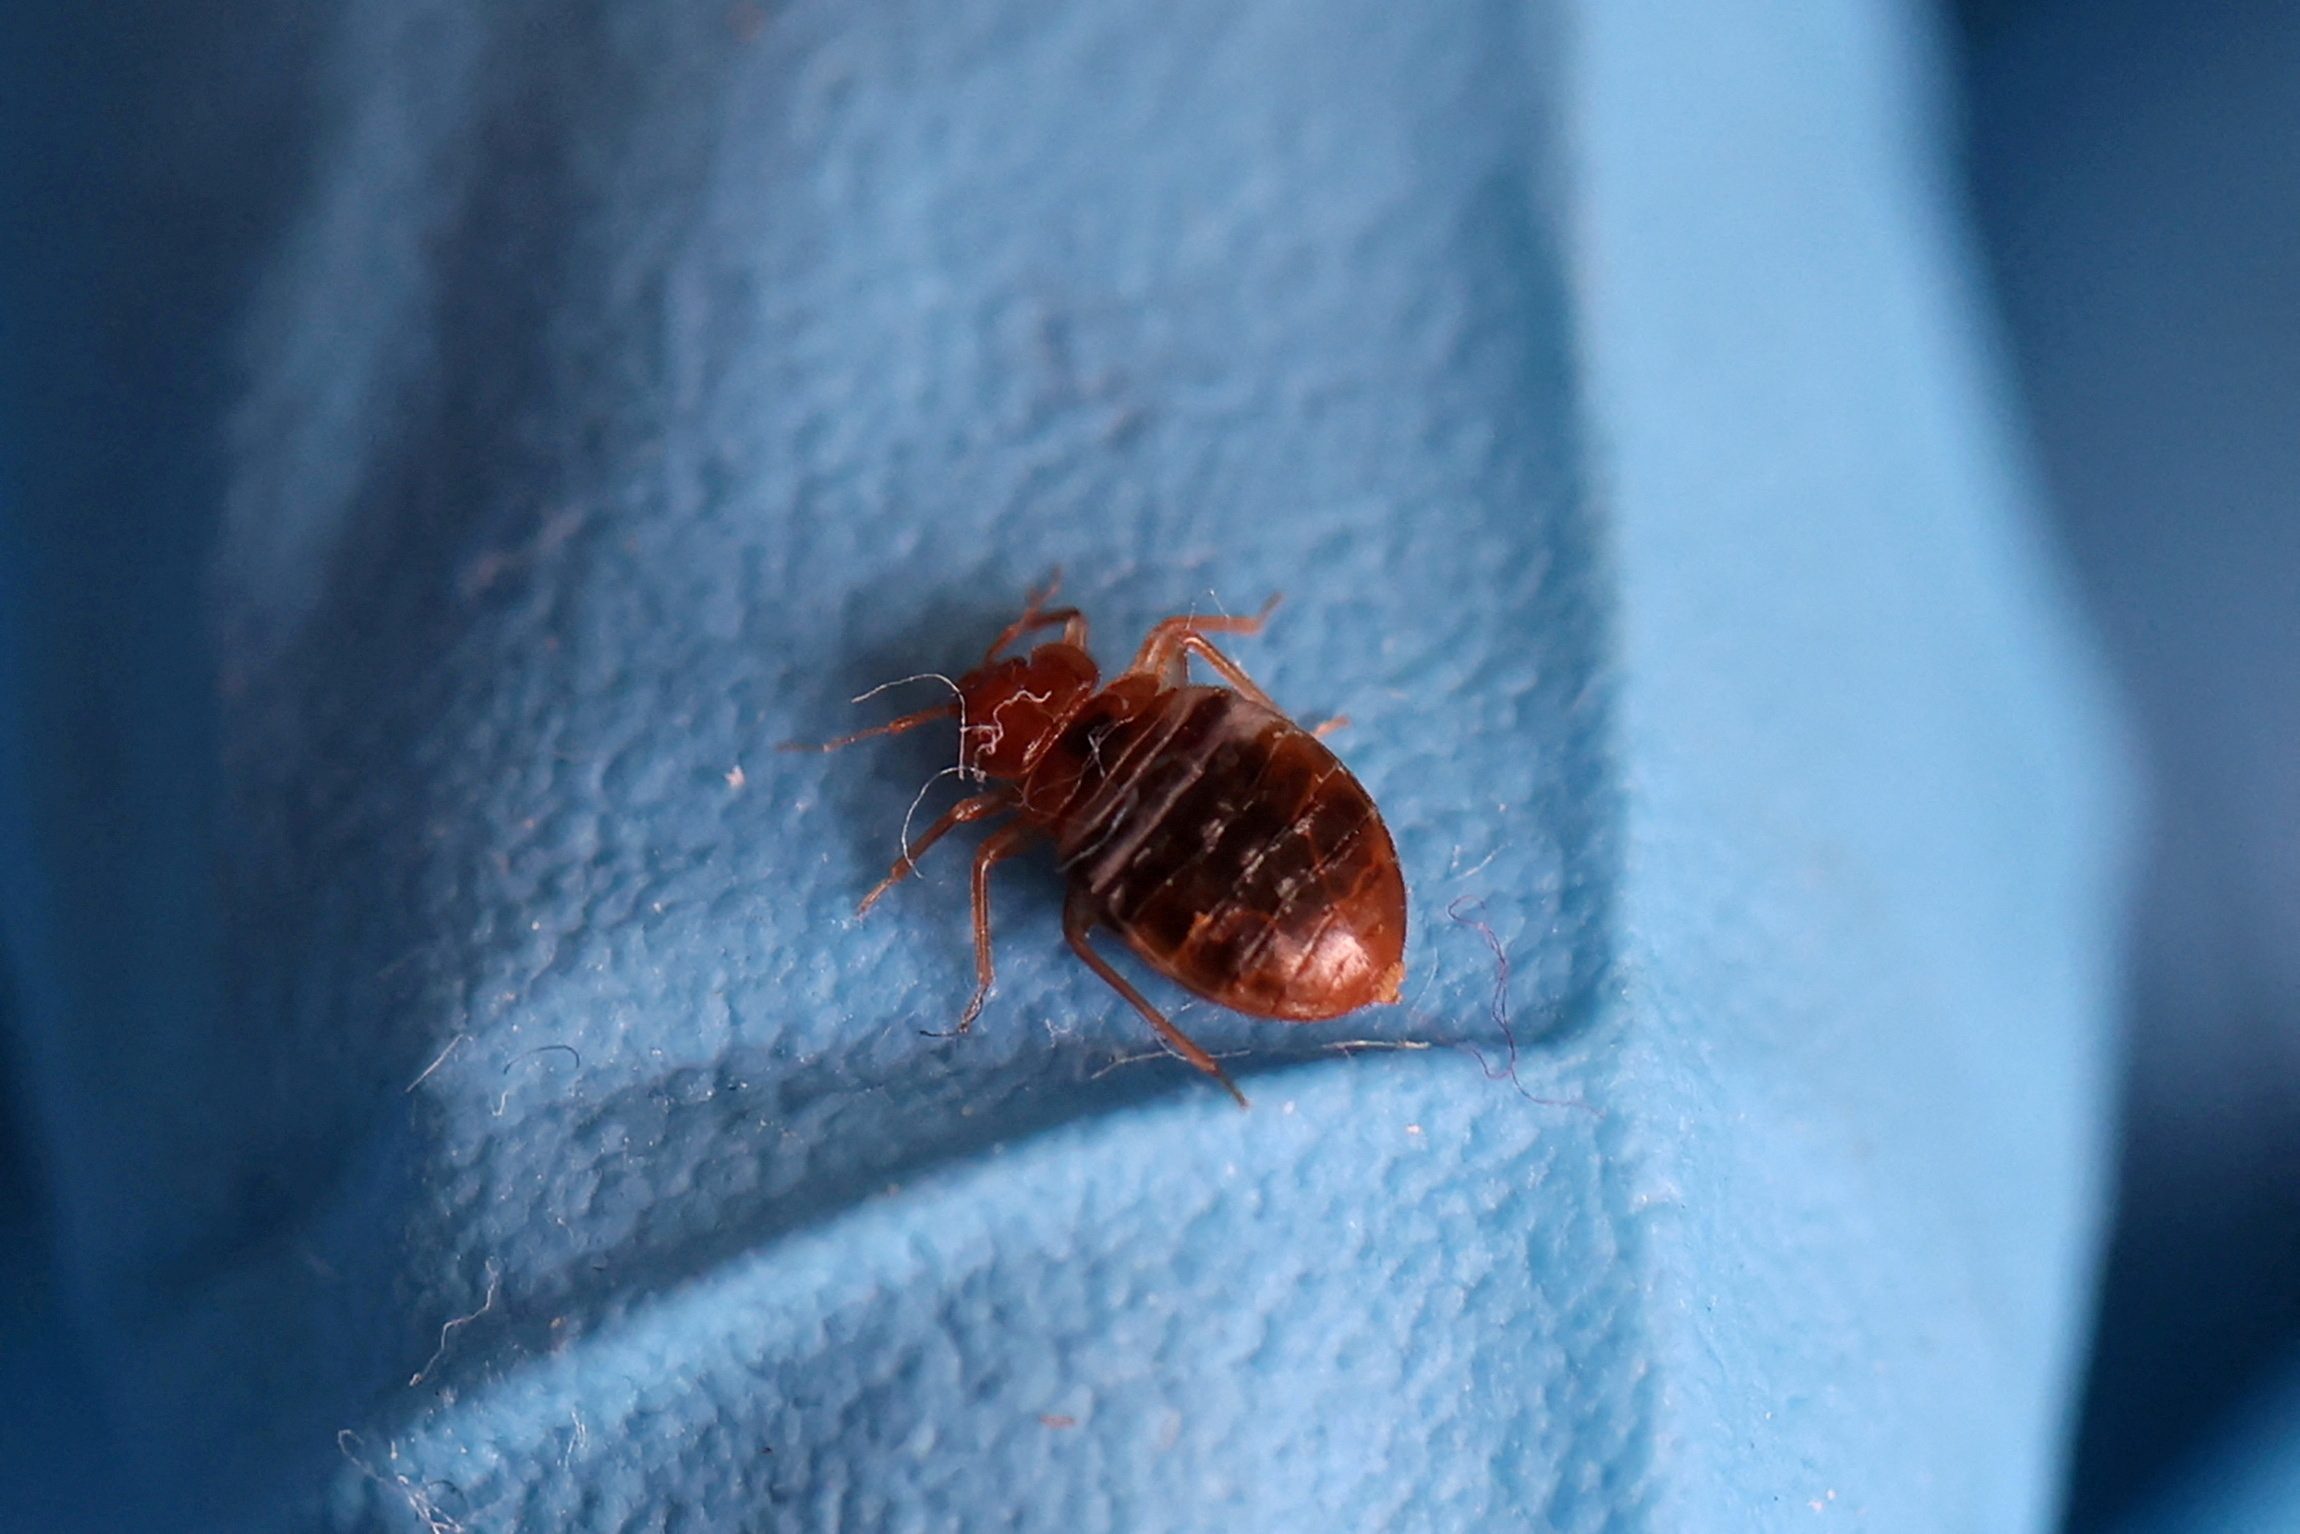 South Korea ramps up pest control after reports of bedbugs